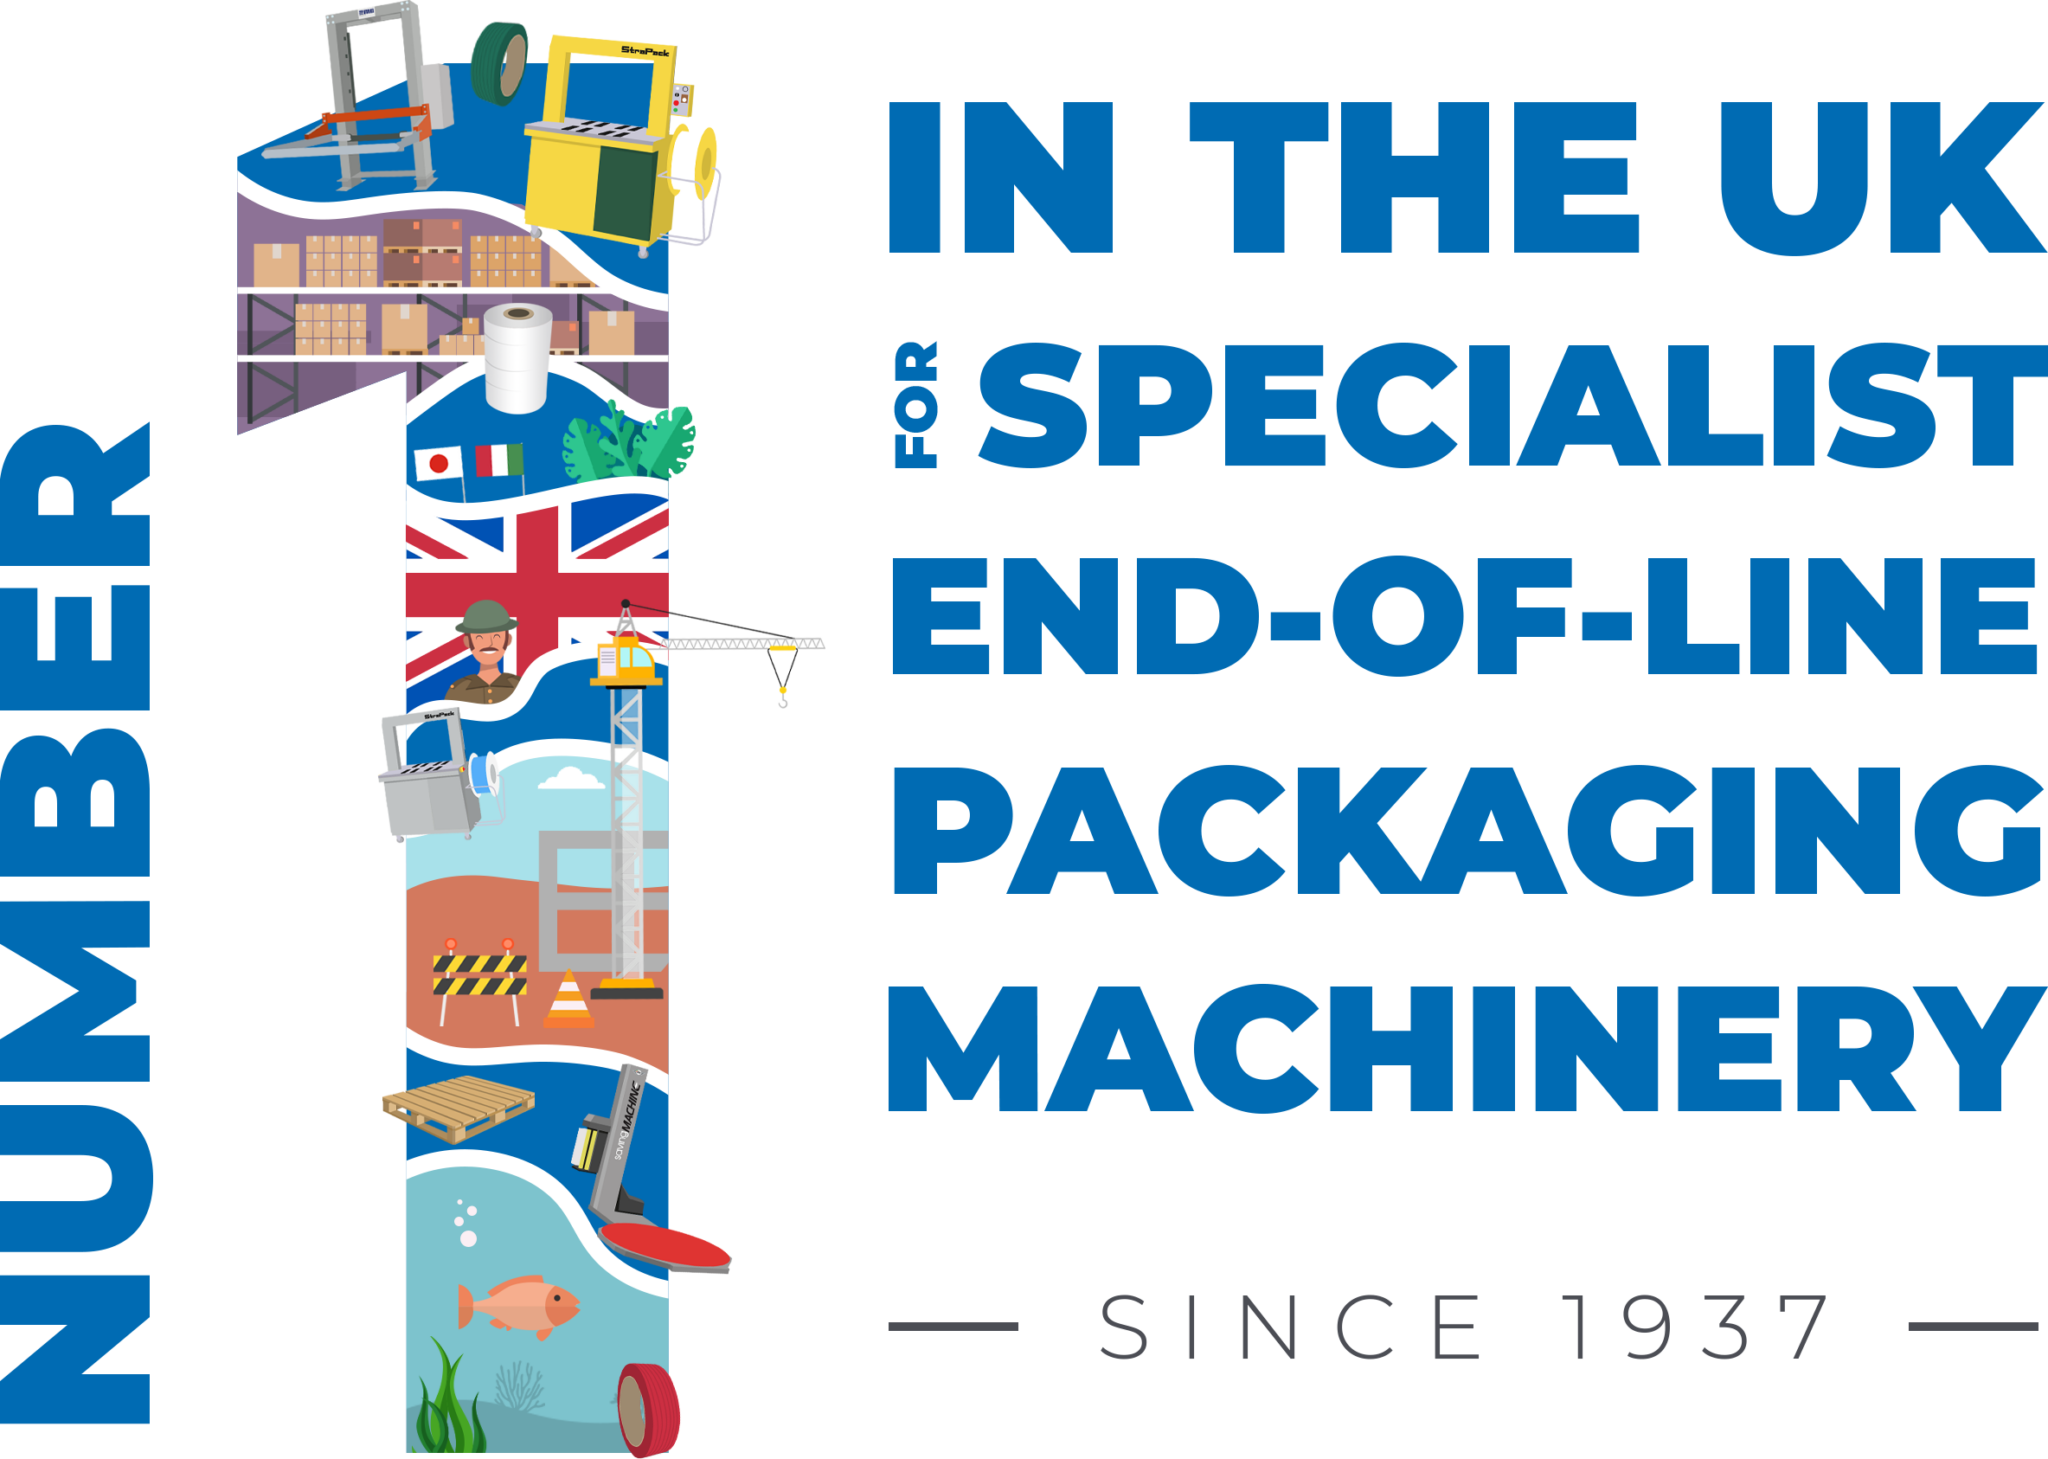 Number one in the UK for specialist end-of-line packaging machinery - since 1937